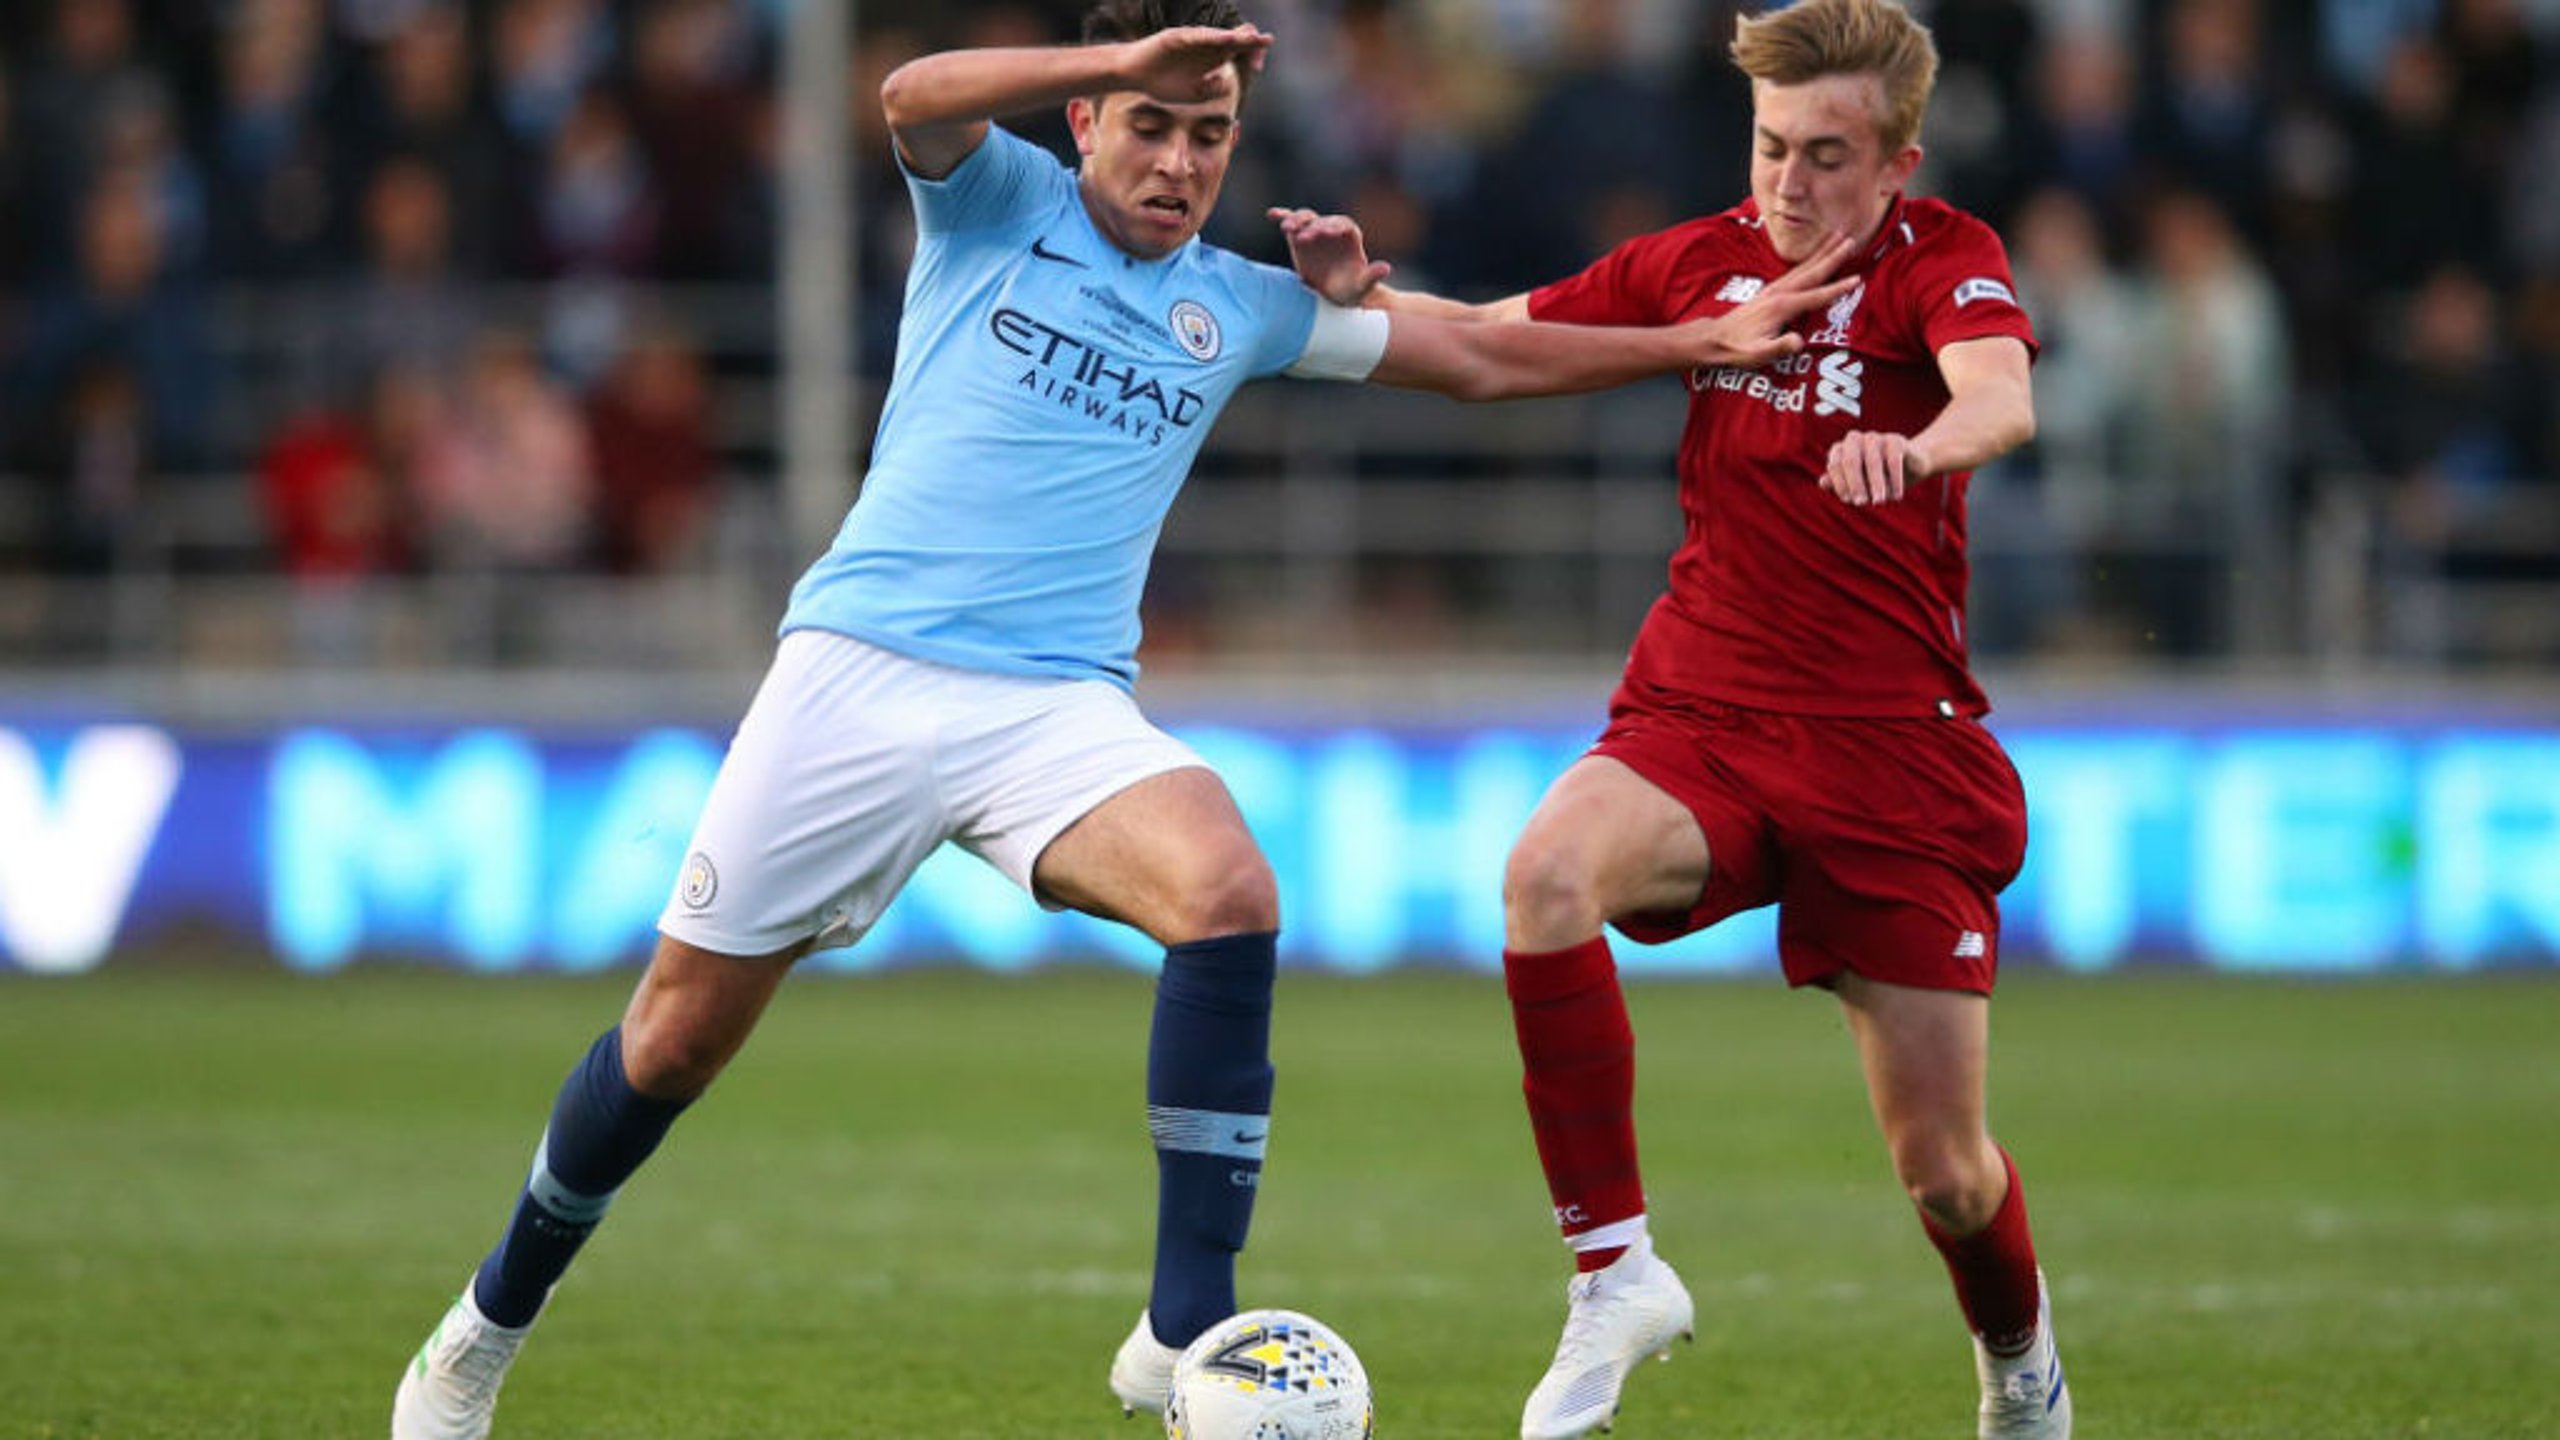 ACTION STATIONS: City skipper Eric Garcia fends off Jake Cain of Liverpool